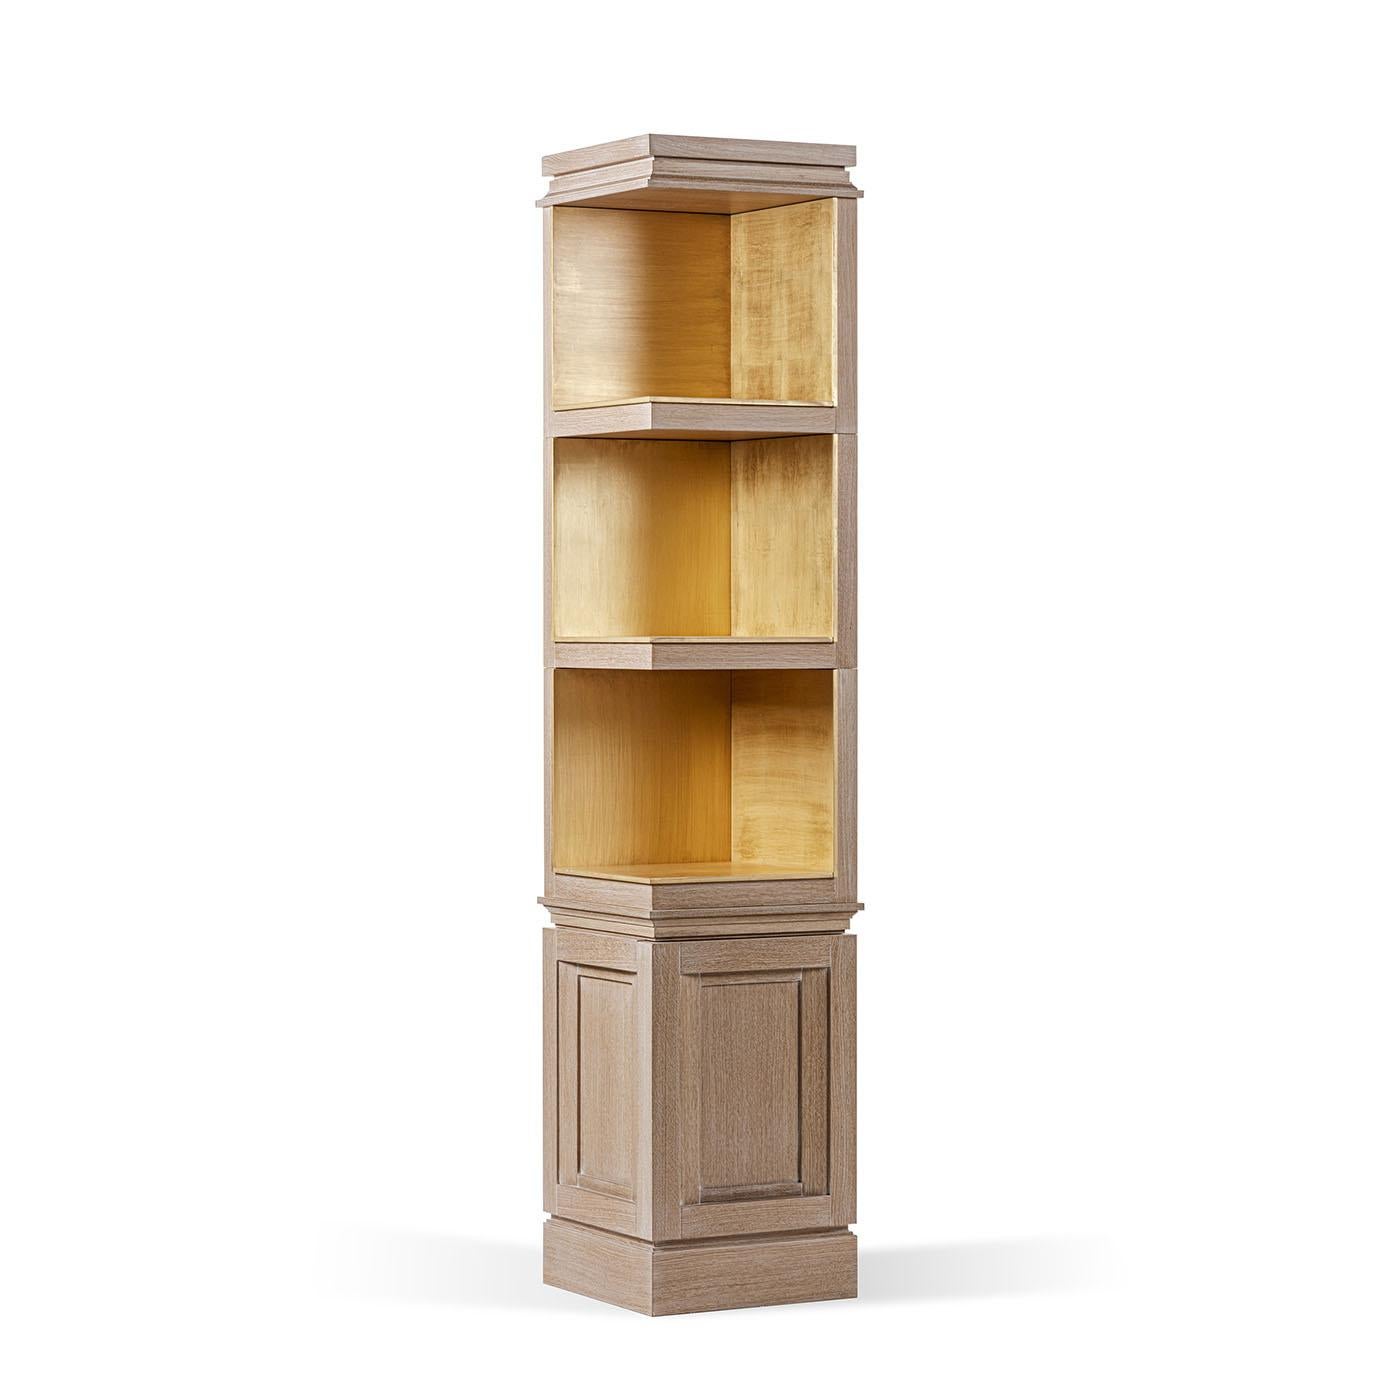 The Akiba Oak lacquered bookcase, expertly crafted from lustrous oak wood, boasts a sleek and sophisticated design, enhanced by its modular composition, allowing for versatility and adaptability to suit any storage needs. The paneles are ingeniously